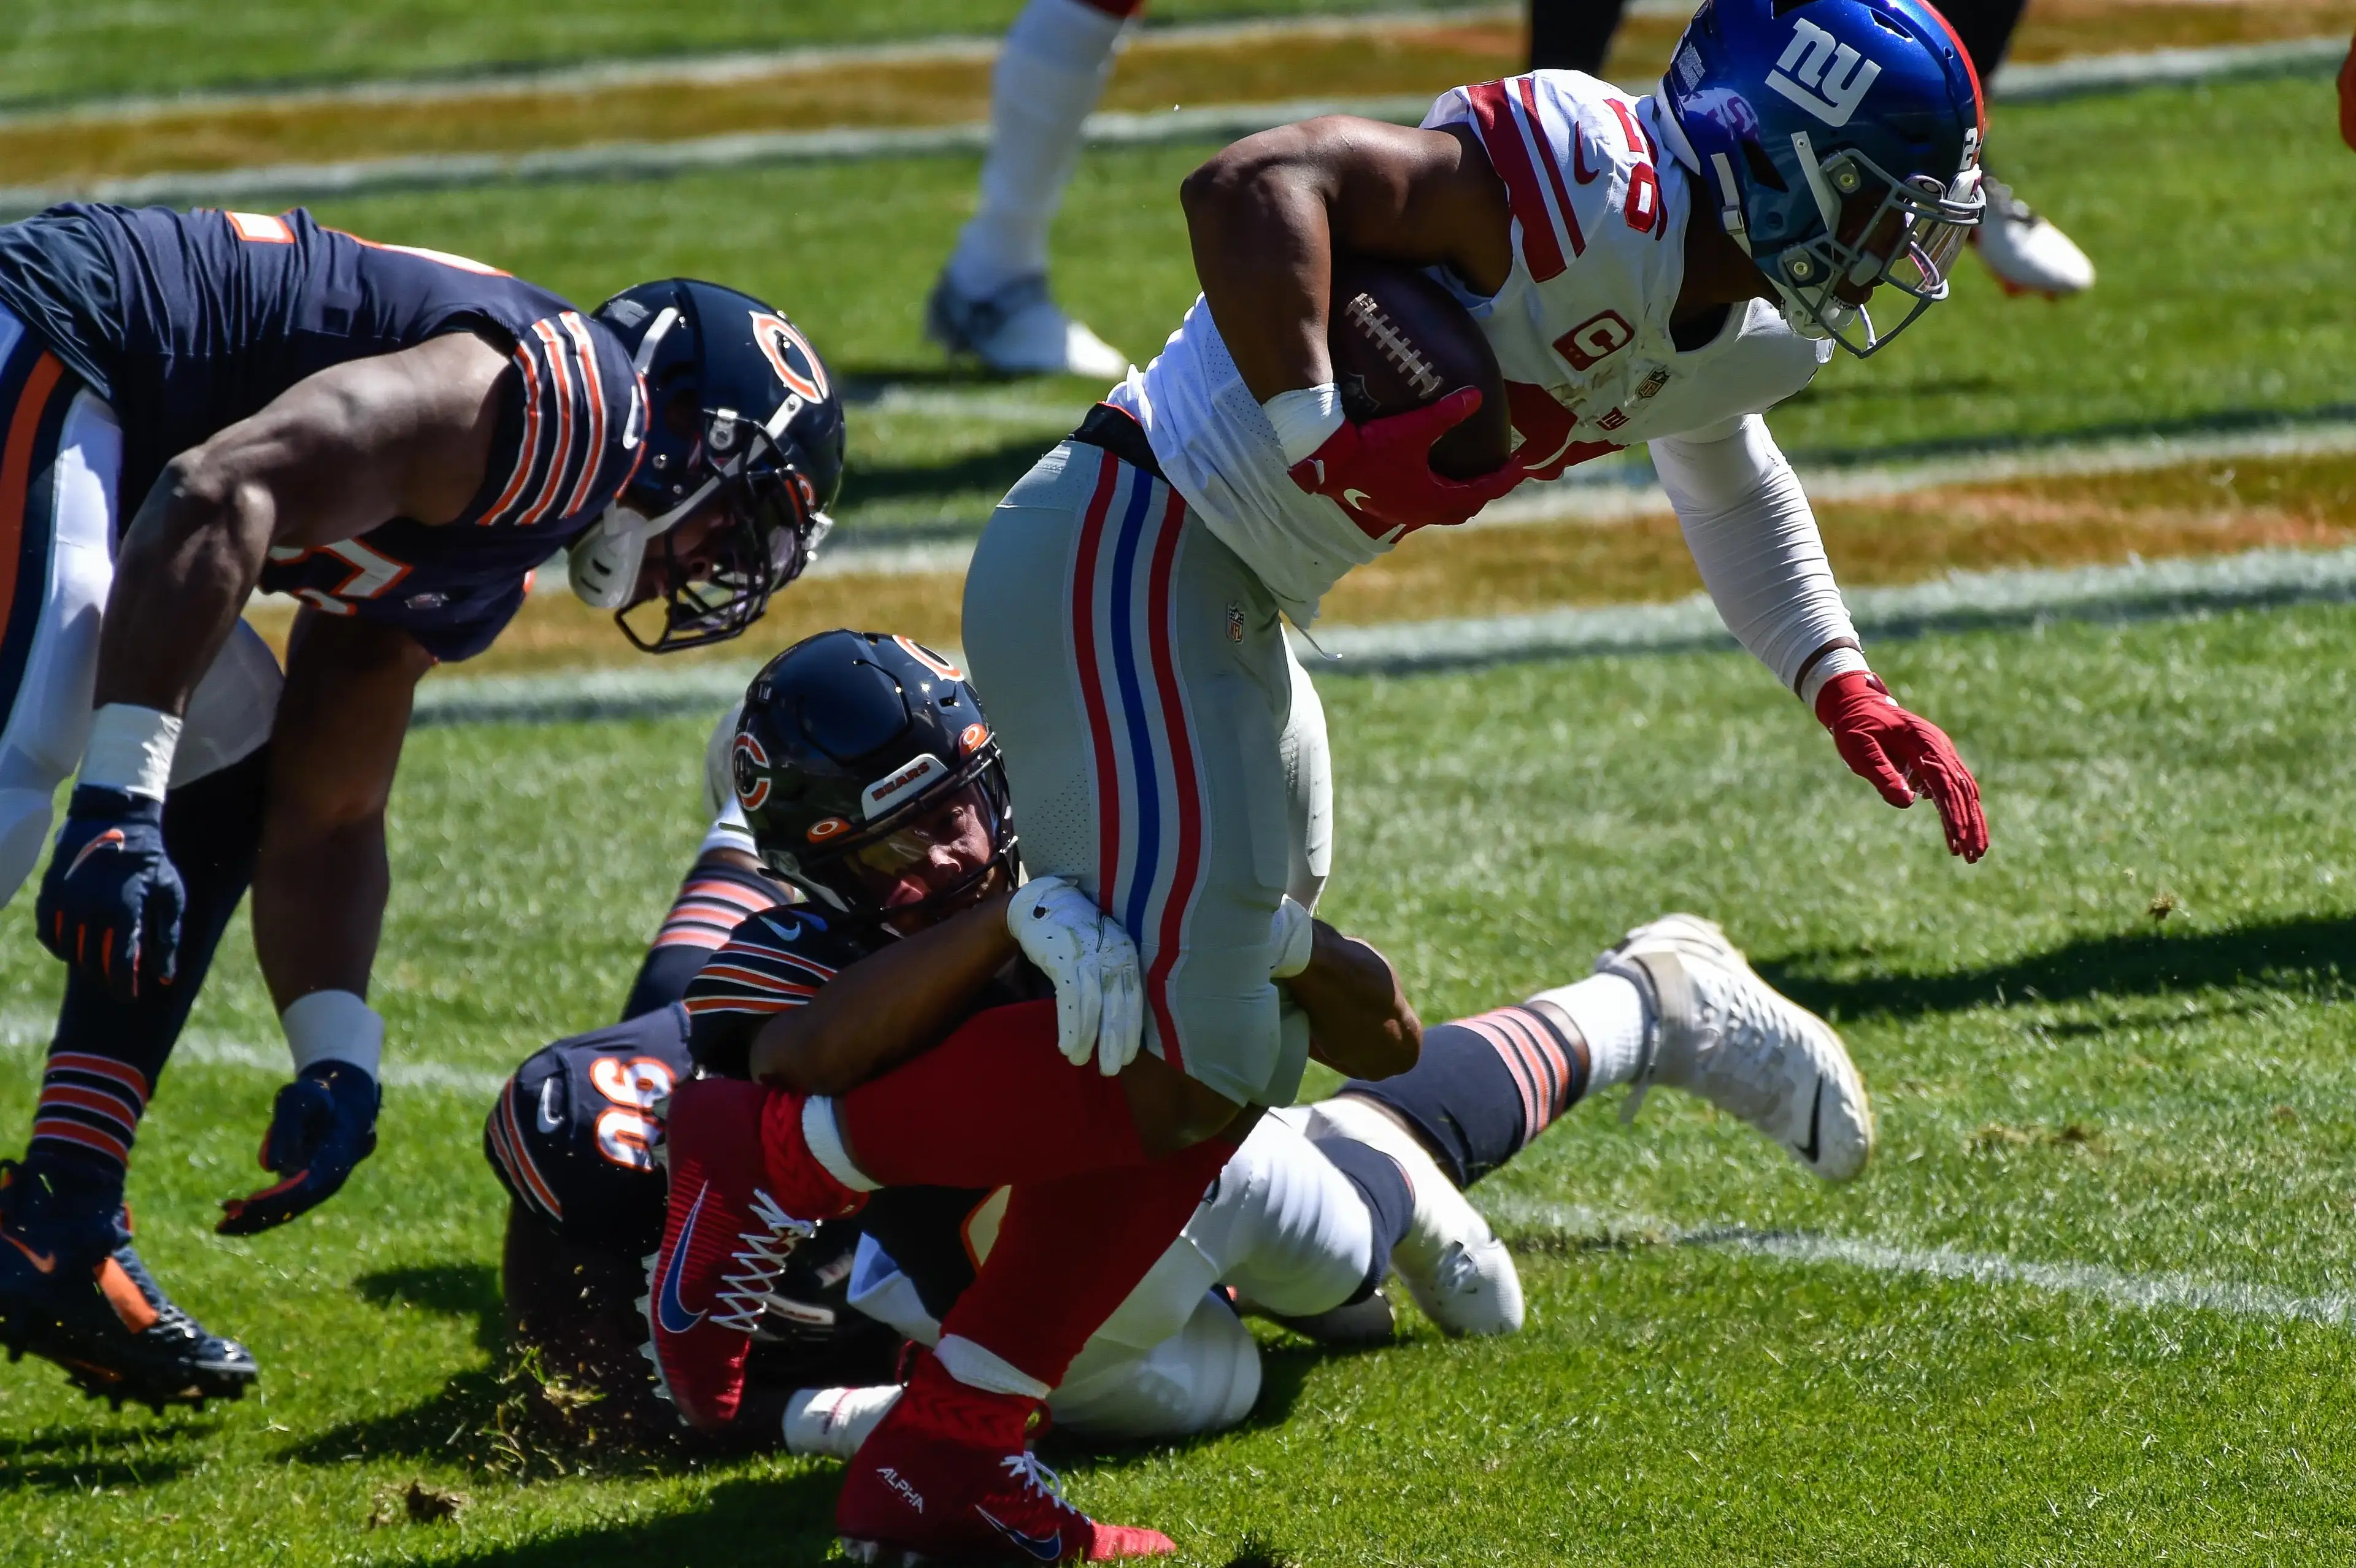 Sep 20, 2020; Chicago, Illinois, USA; New York Giants running back Saquon Barkley (26) runs the ball against the Chicago Bears during the second quarter at Soldier Field. Barkley would be injured on the play and removed from the game. / Jeffrey Becker-USA TODAY Sports